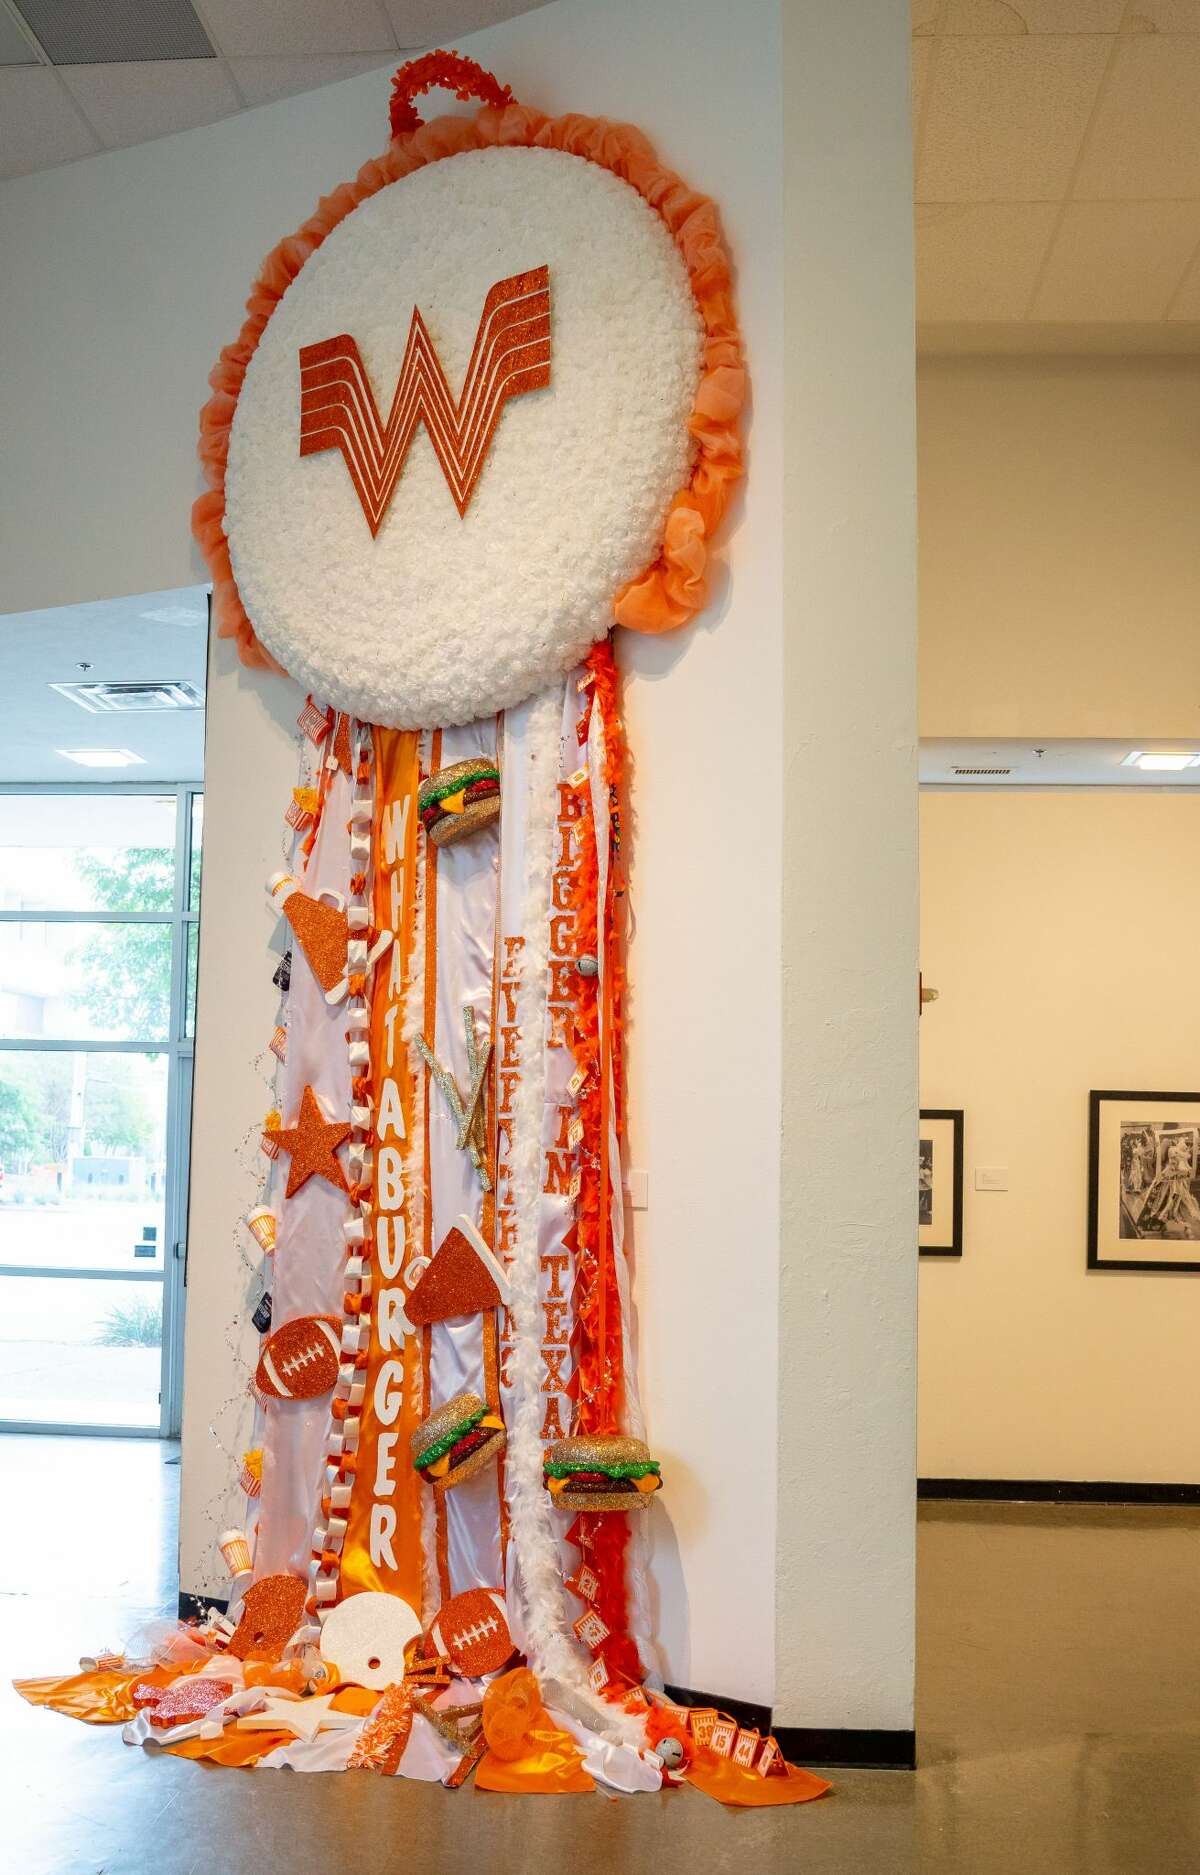 Clocking in at 18 feet tall and six feet wide, the massive mum took 120 hours to build and was constructed with 1,250 flower heads, 50 Whataburger drink cups, 100 fry containers, 300 feet or ribbon, 80 bracelets and key chains and 165 feet of feathered fringe.